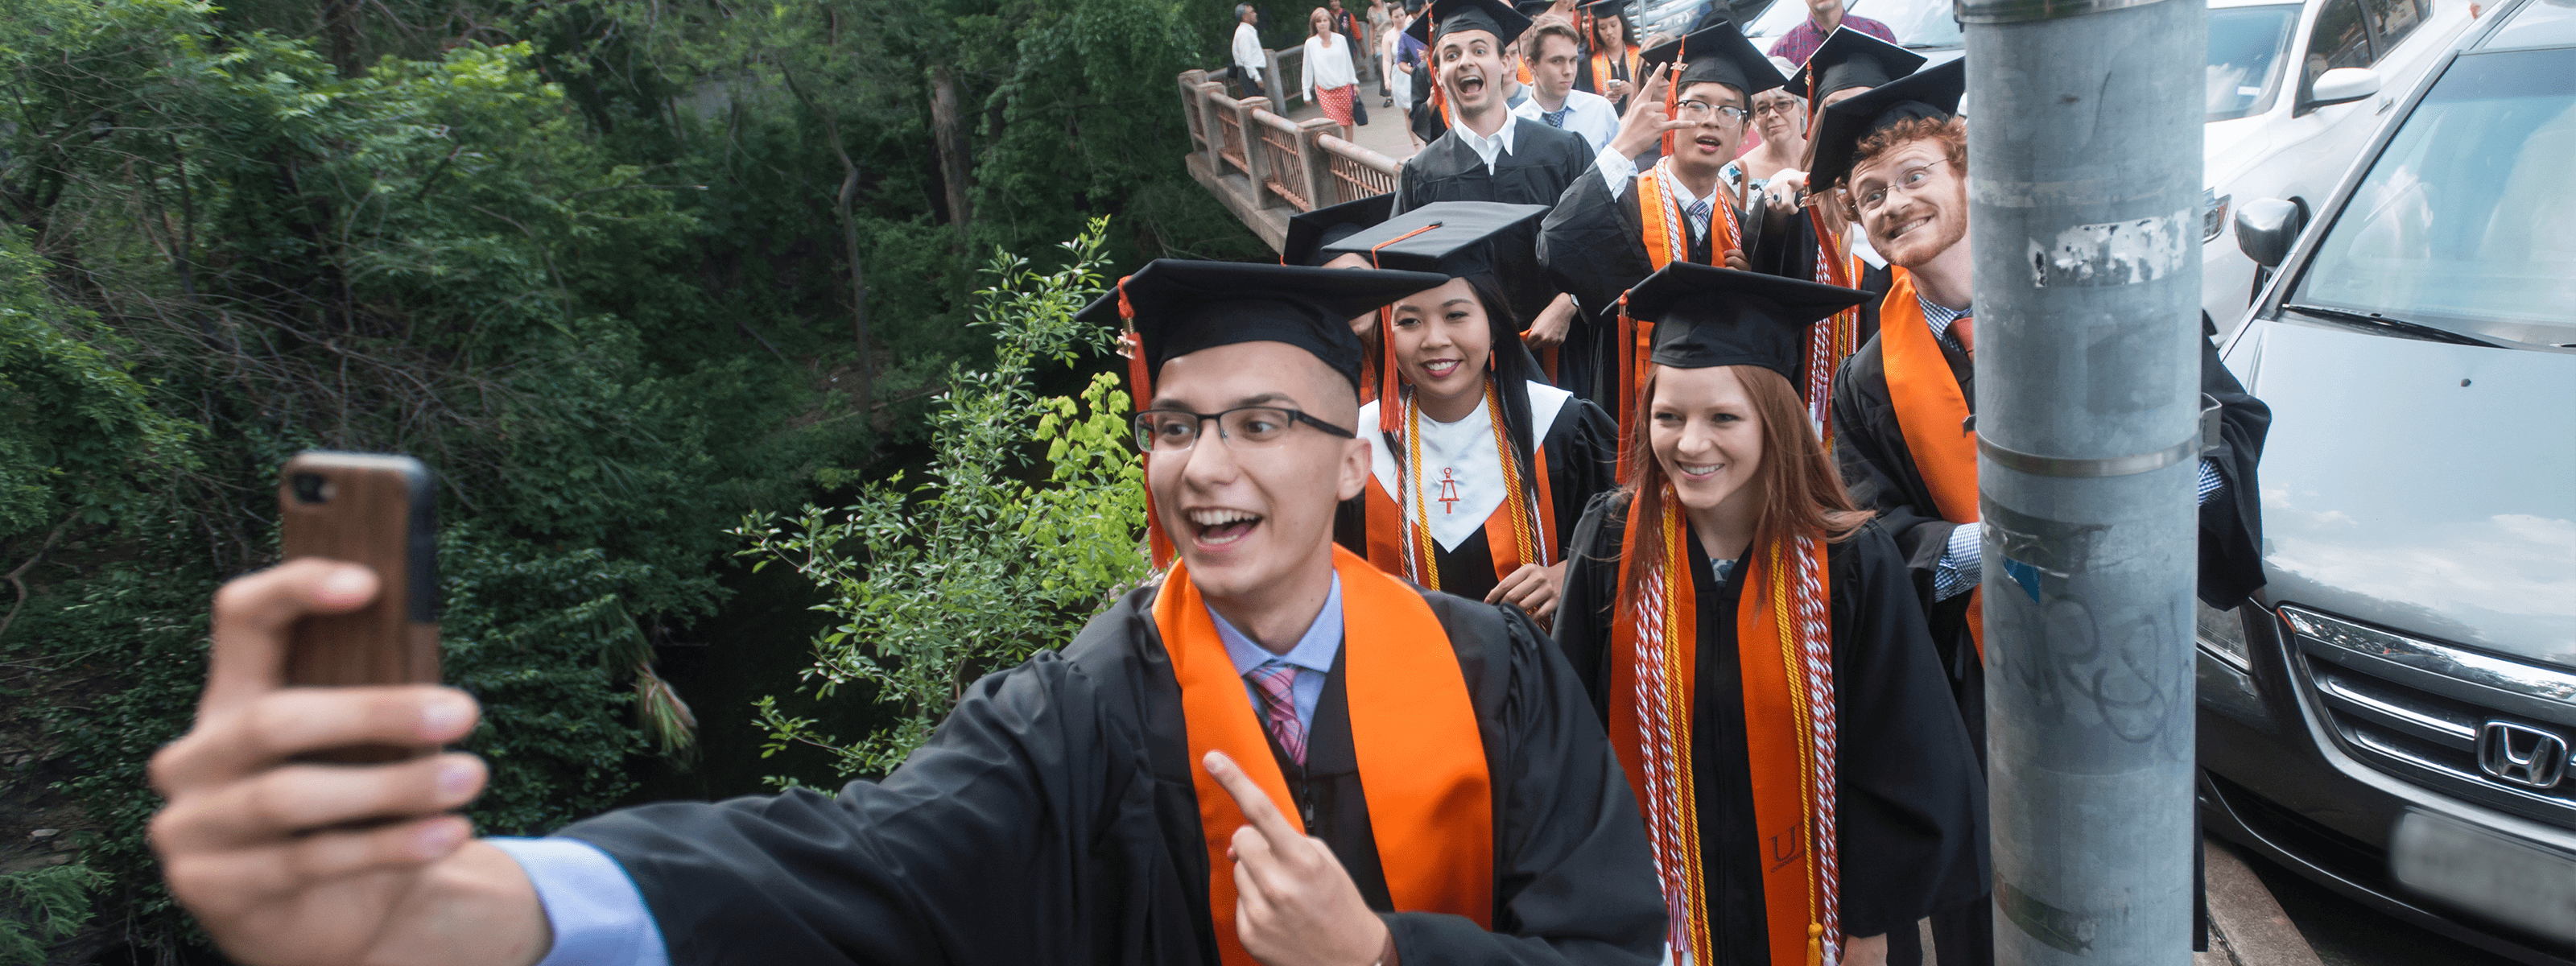 crowd of graduating students wearing Cockrell School of Engineering regalia posing for a selfie